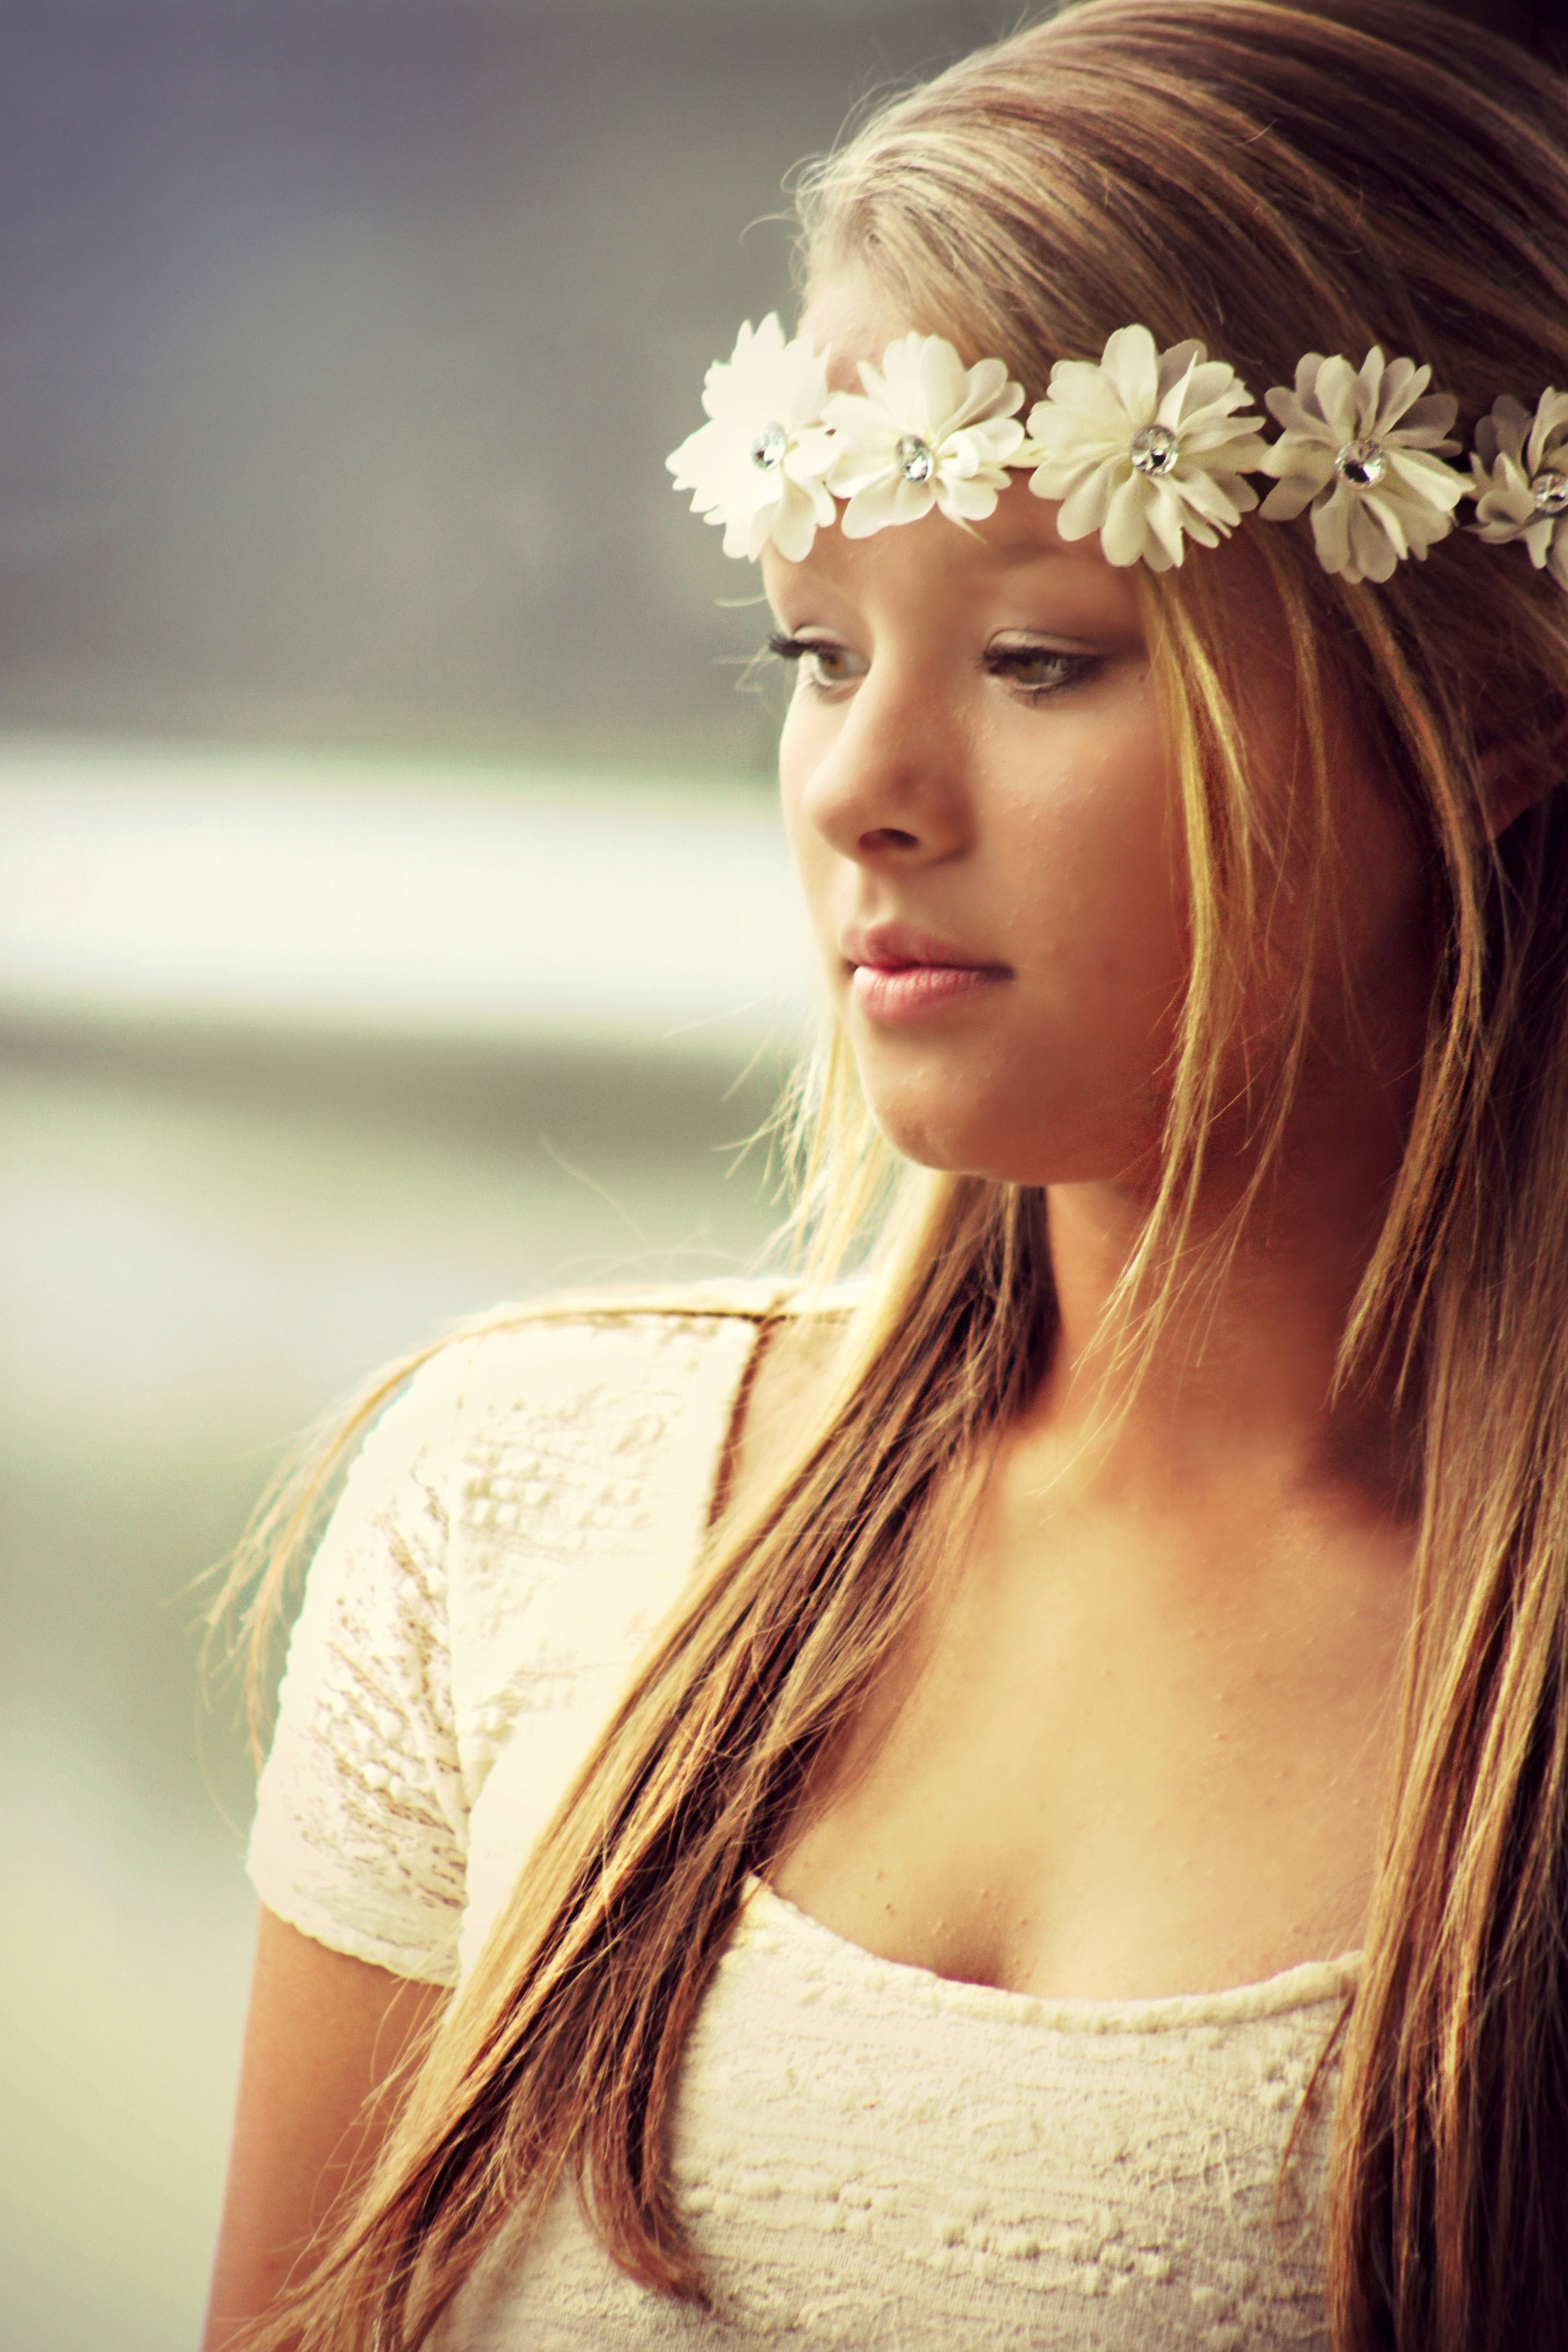 Pretty girl with crown of white flowers image - Free stock photo ...